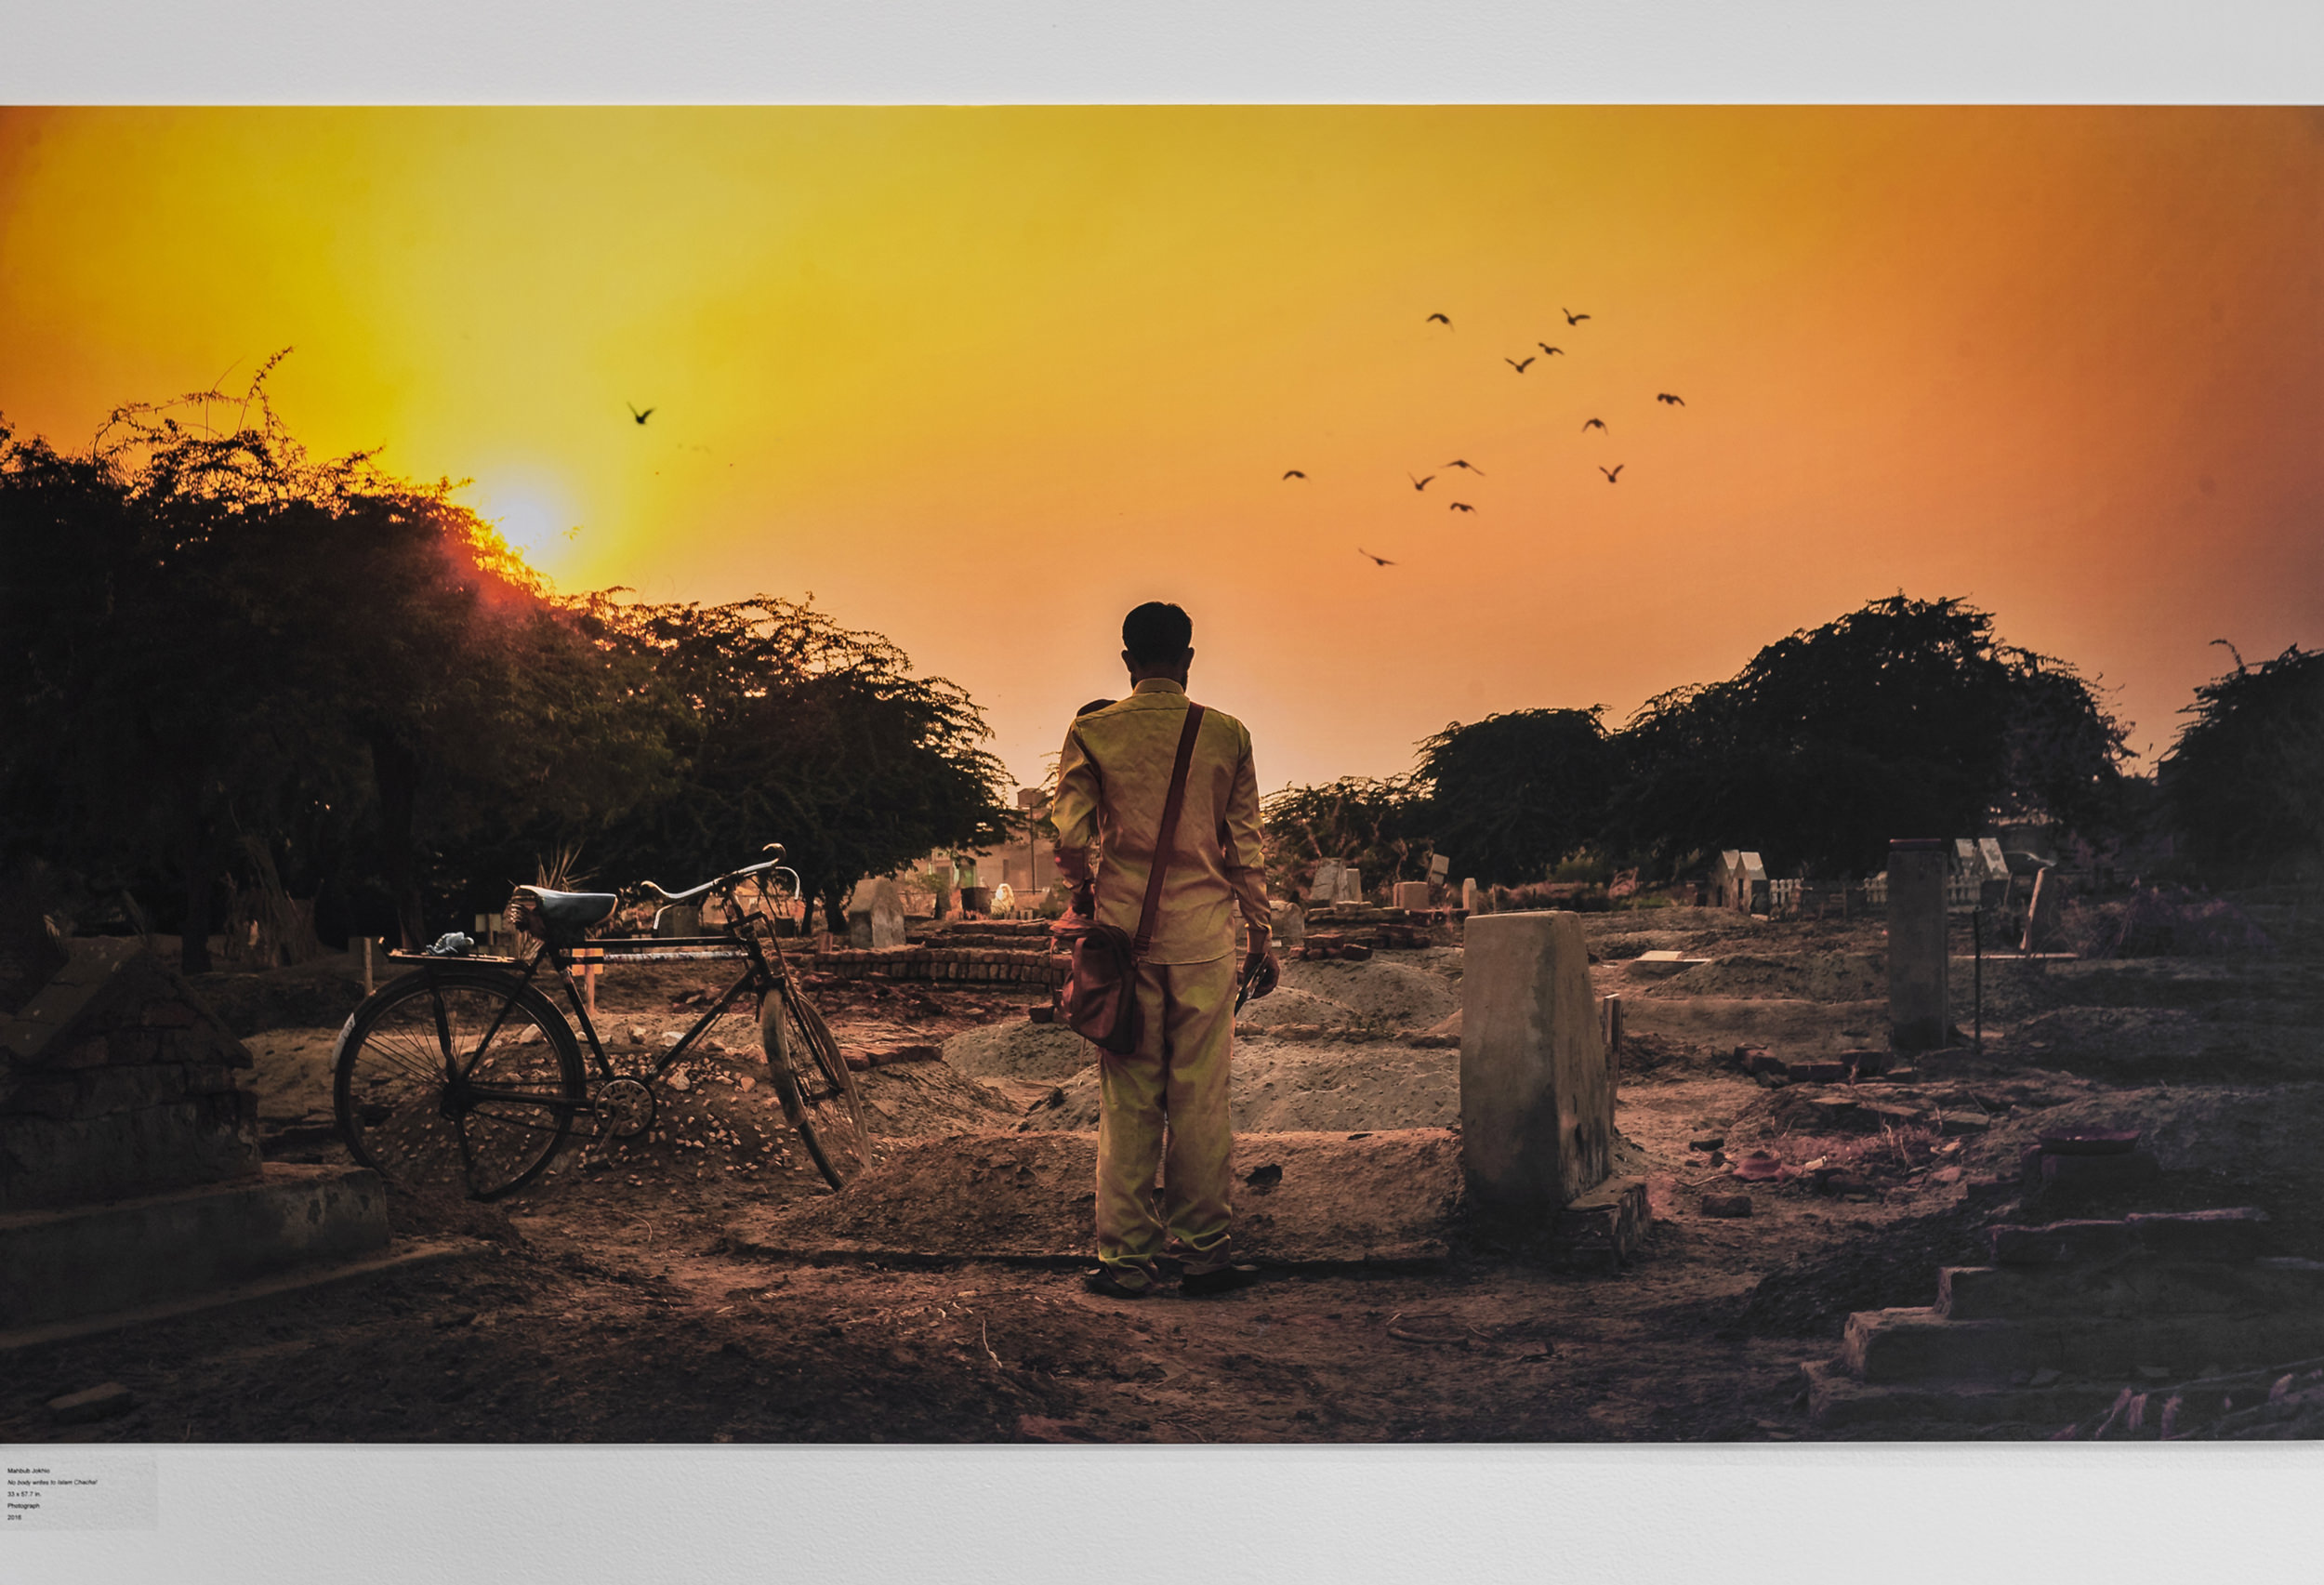 One of the photographs in Mahbub Jokhio's series, As Time Passes in City of the Buried.